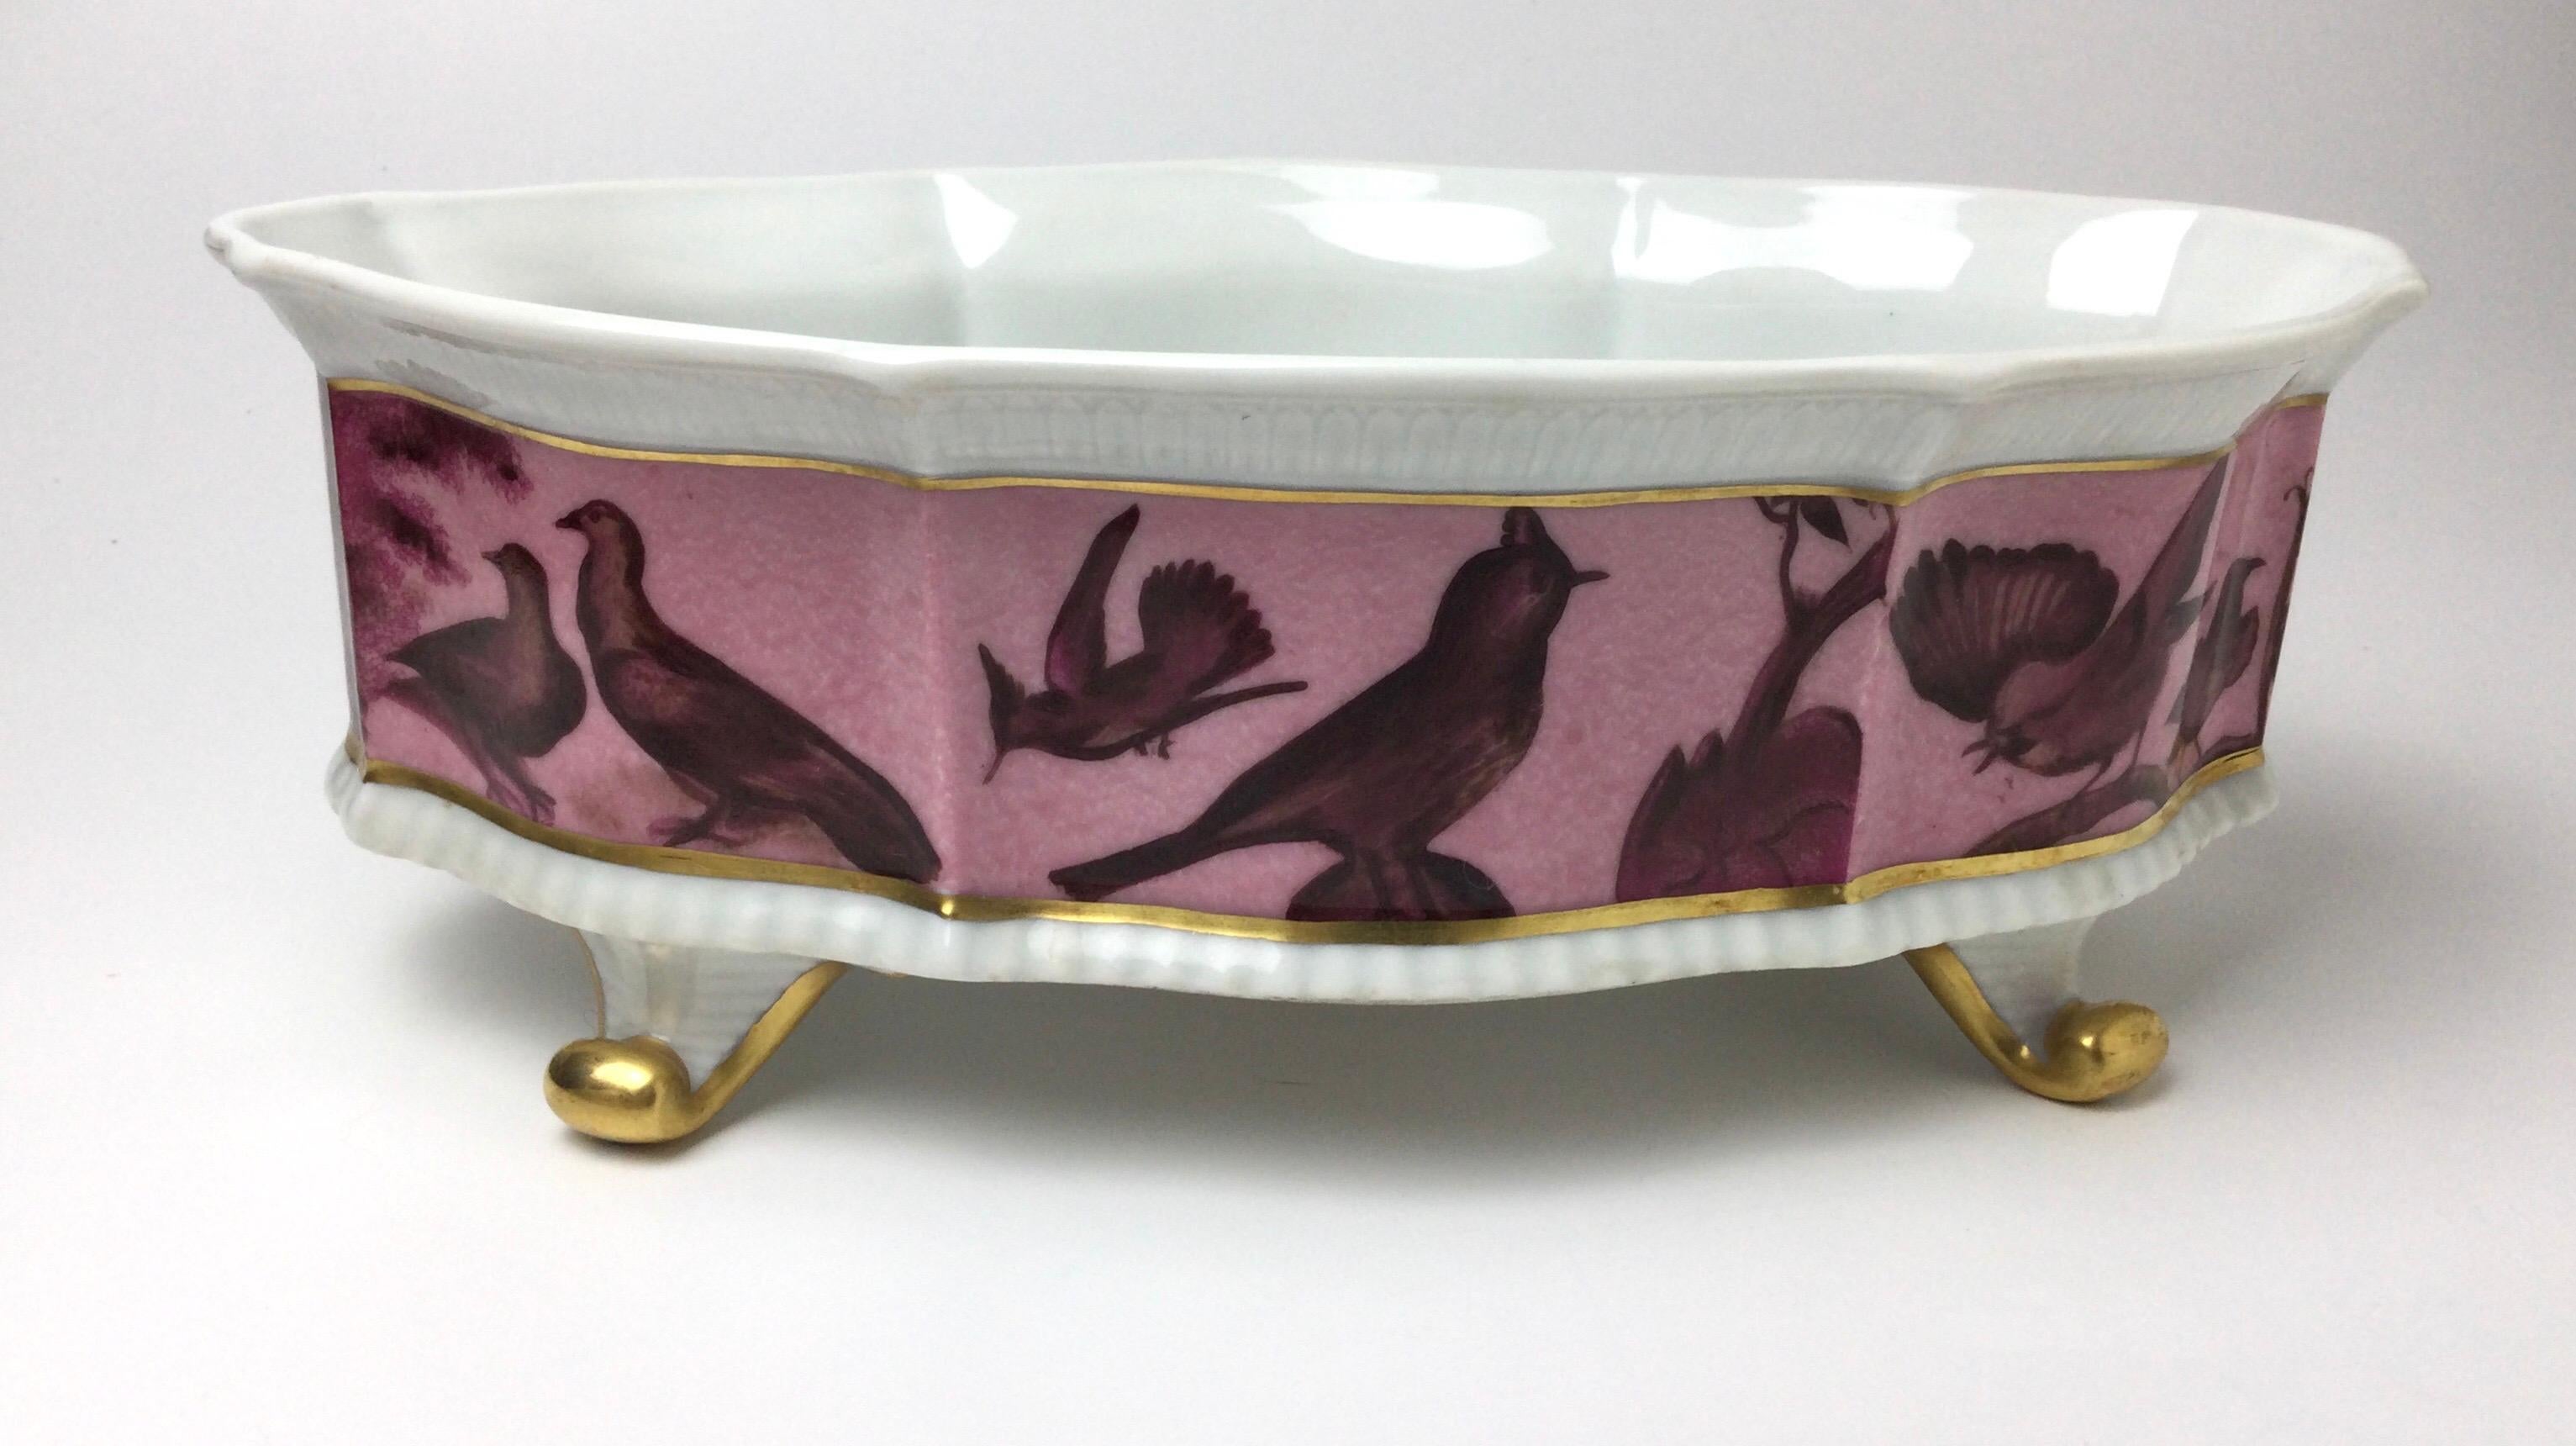 Wonderful hand painted Limoges France footed center bowl Artist signed on bottom. Great condition. Stands 4 3/4